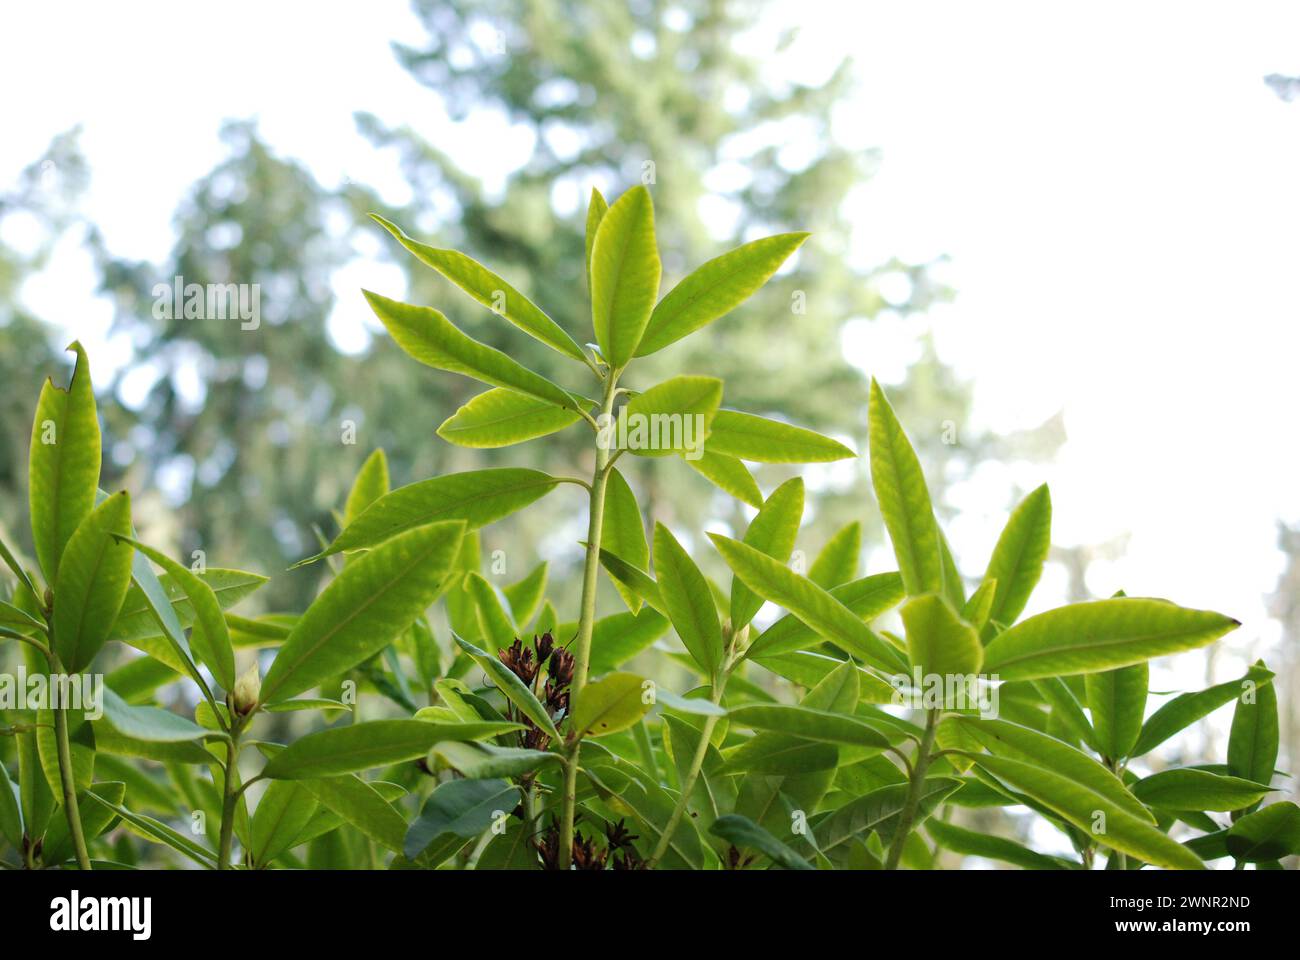 Rhododendron Plant Leaf Canopy Stock Photo